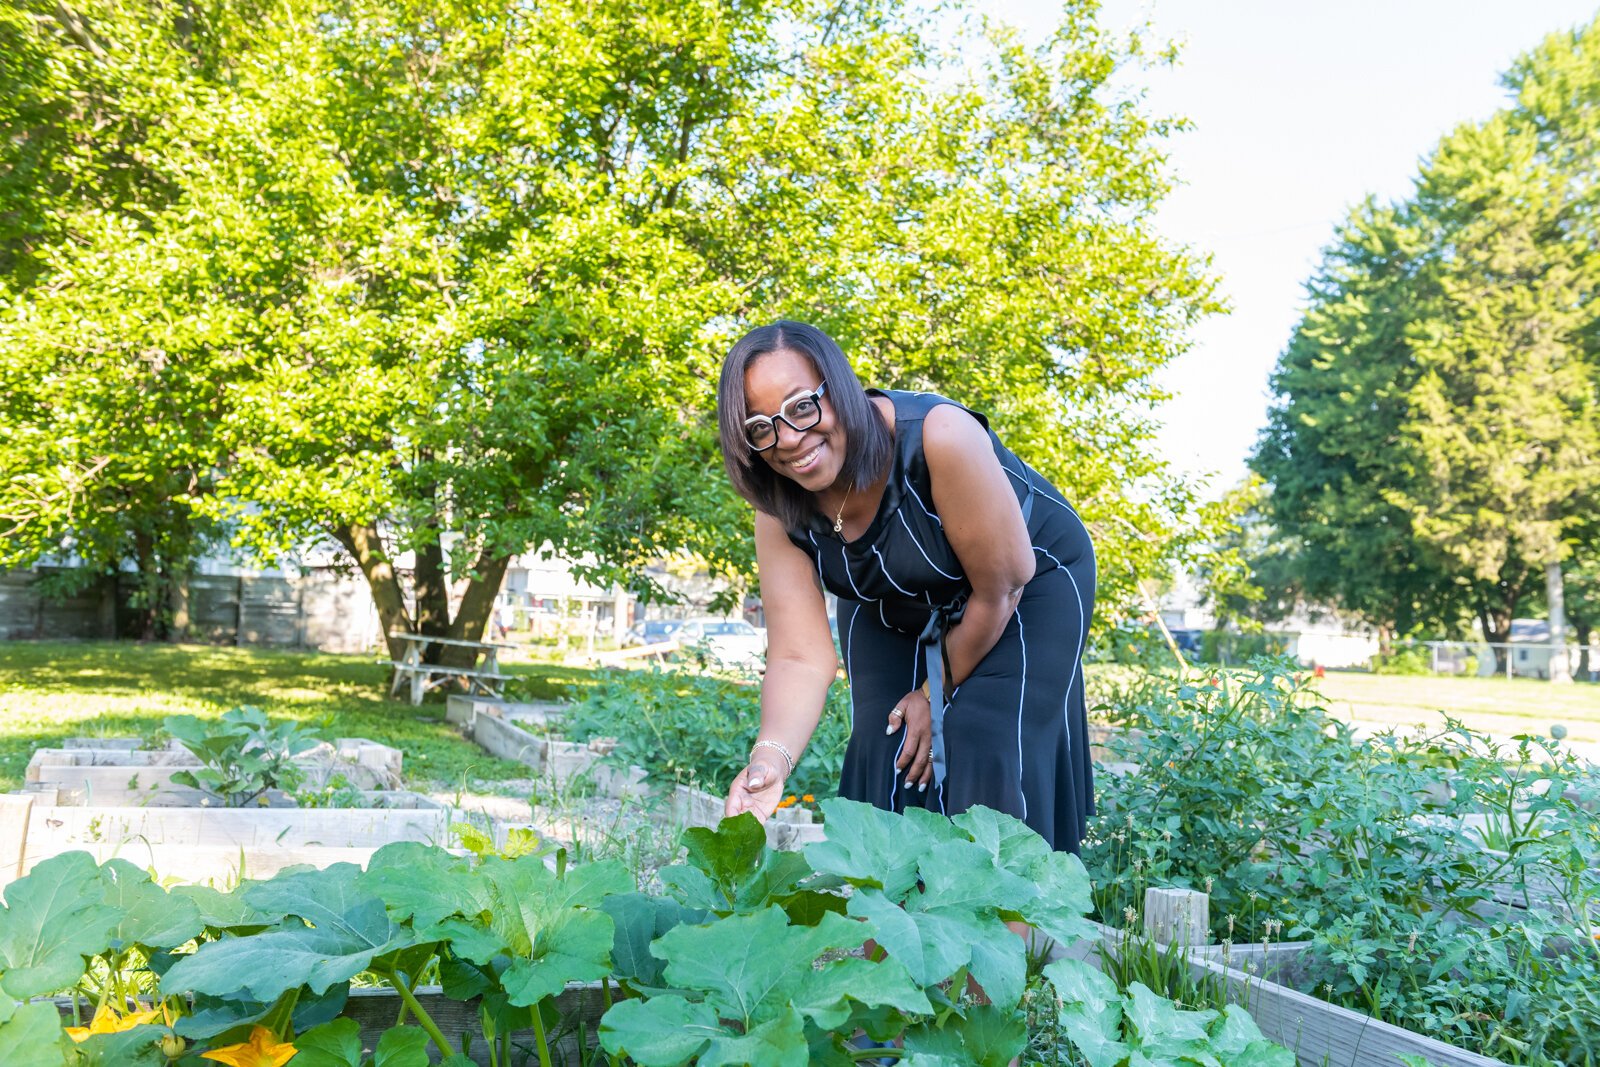 Sharon Tucker, Executive Director of Vincent Village, shows off the community garden.